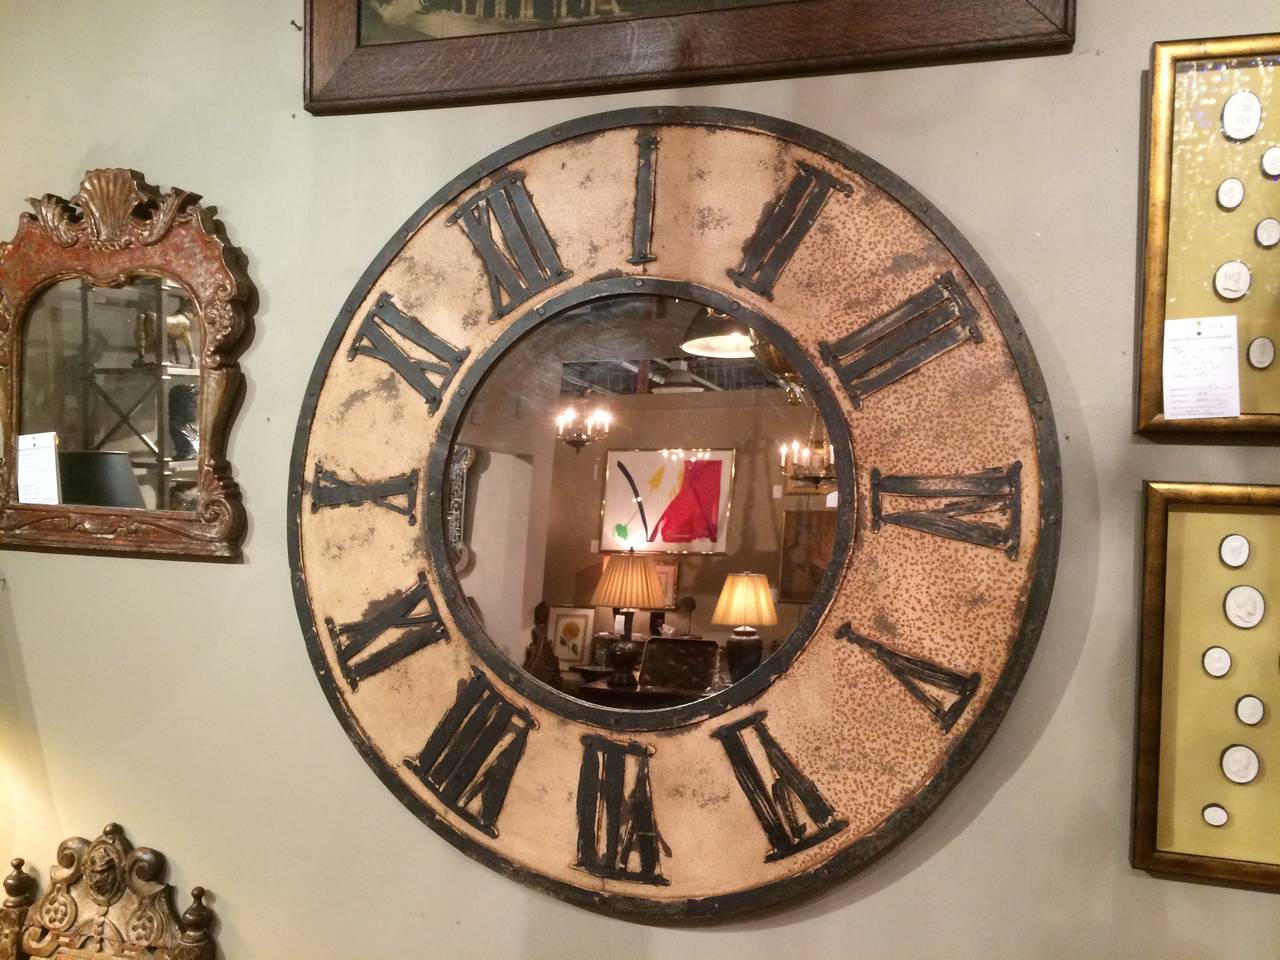 Vintage French painted iron clock face mirror, with Roman numerals.